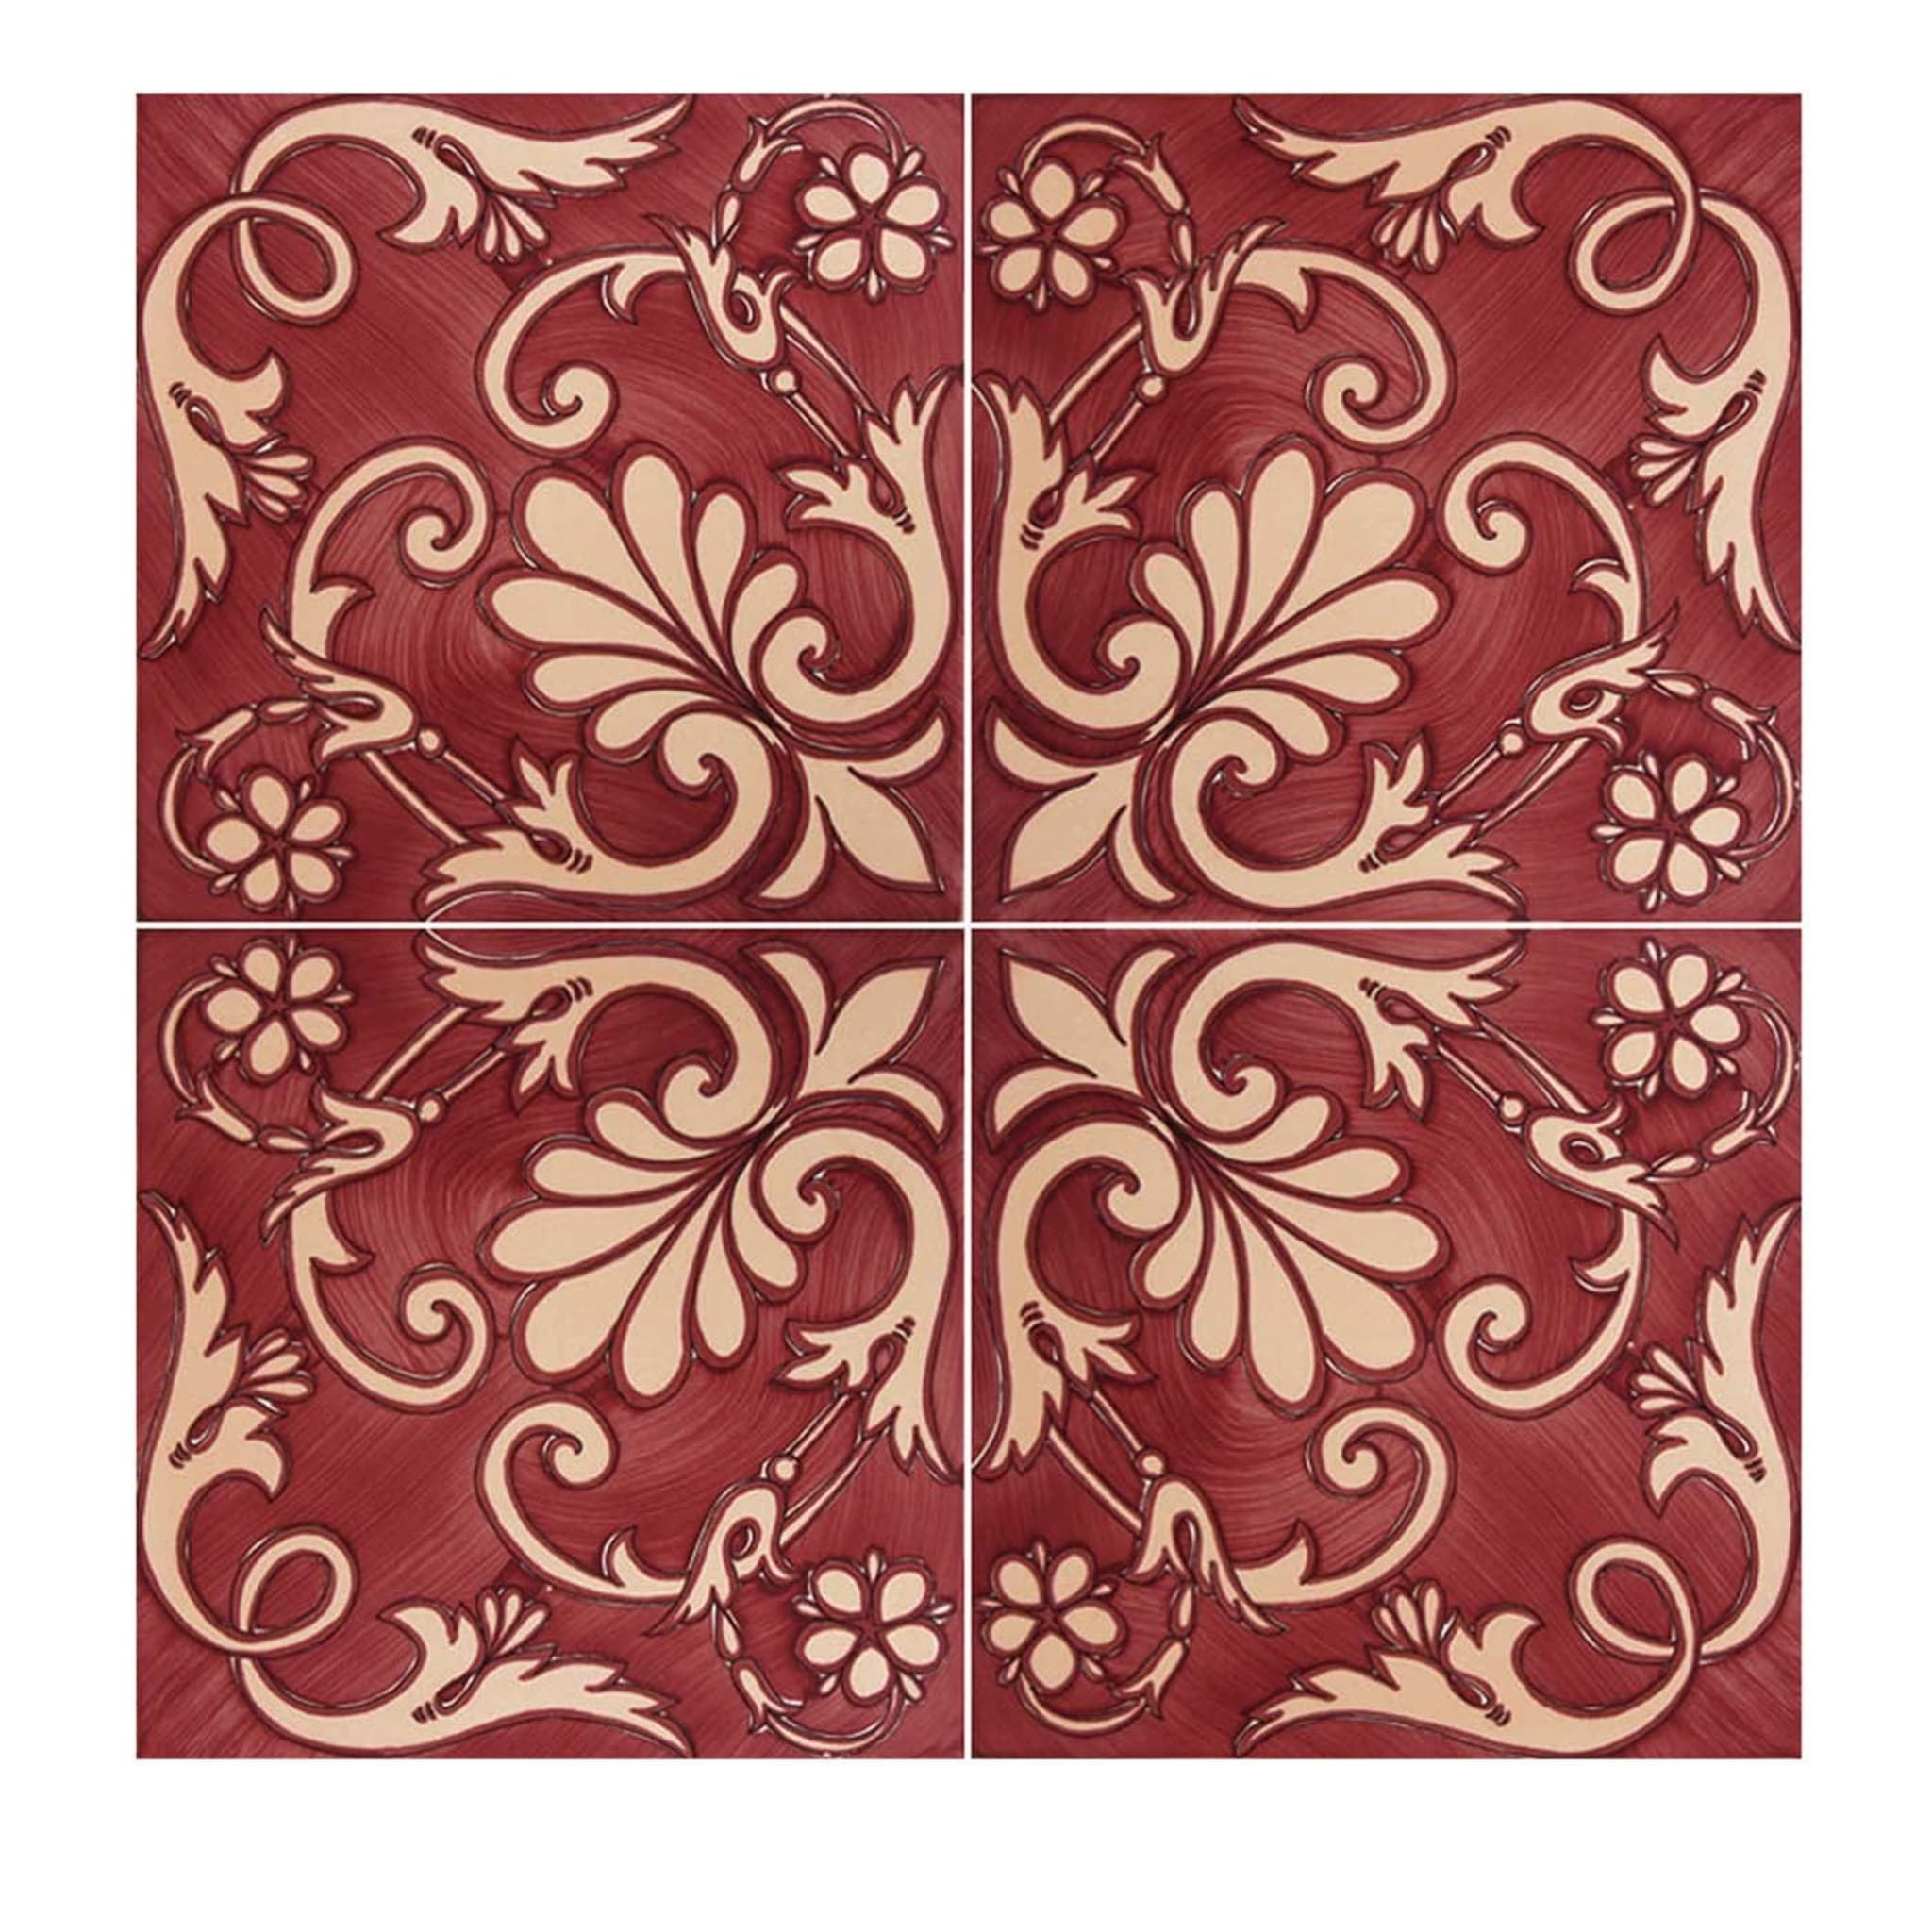 Set of 25 Ieranto Red Tiles Fiori Scuri Collection - Main view